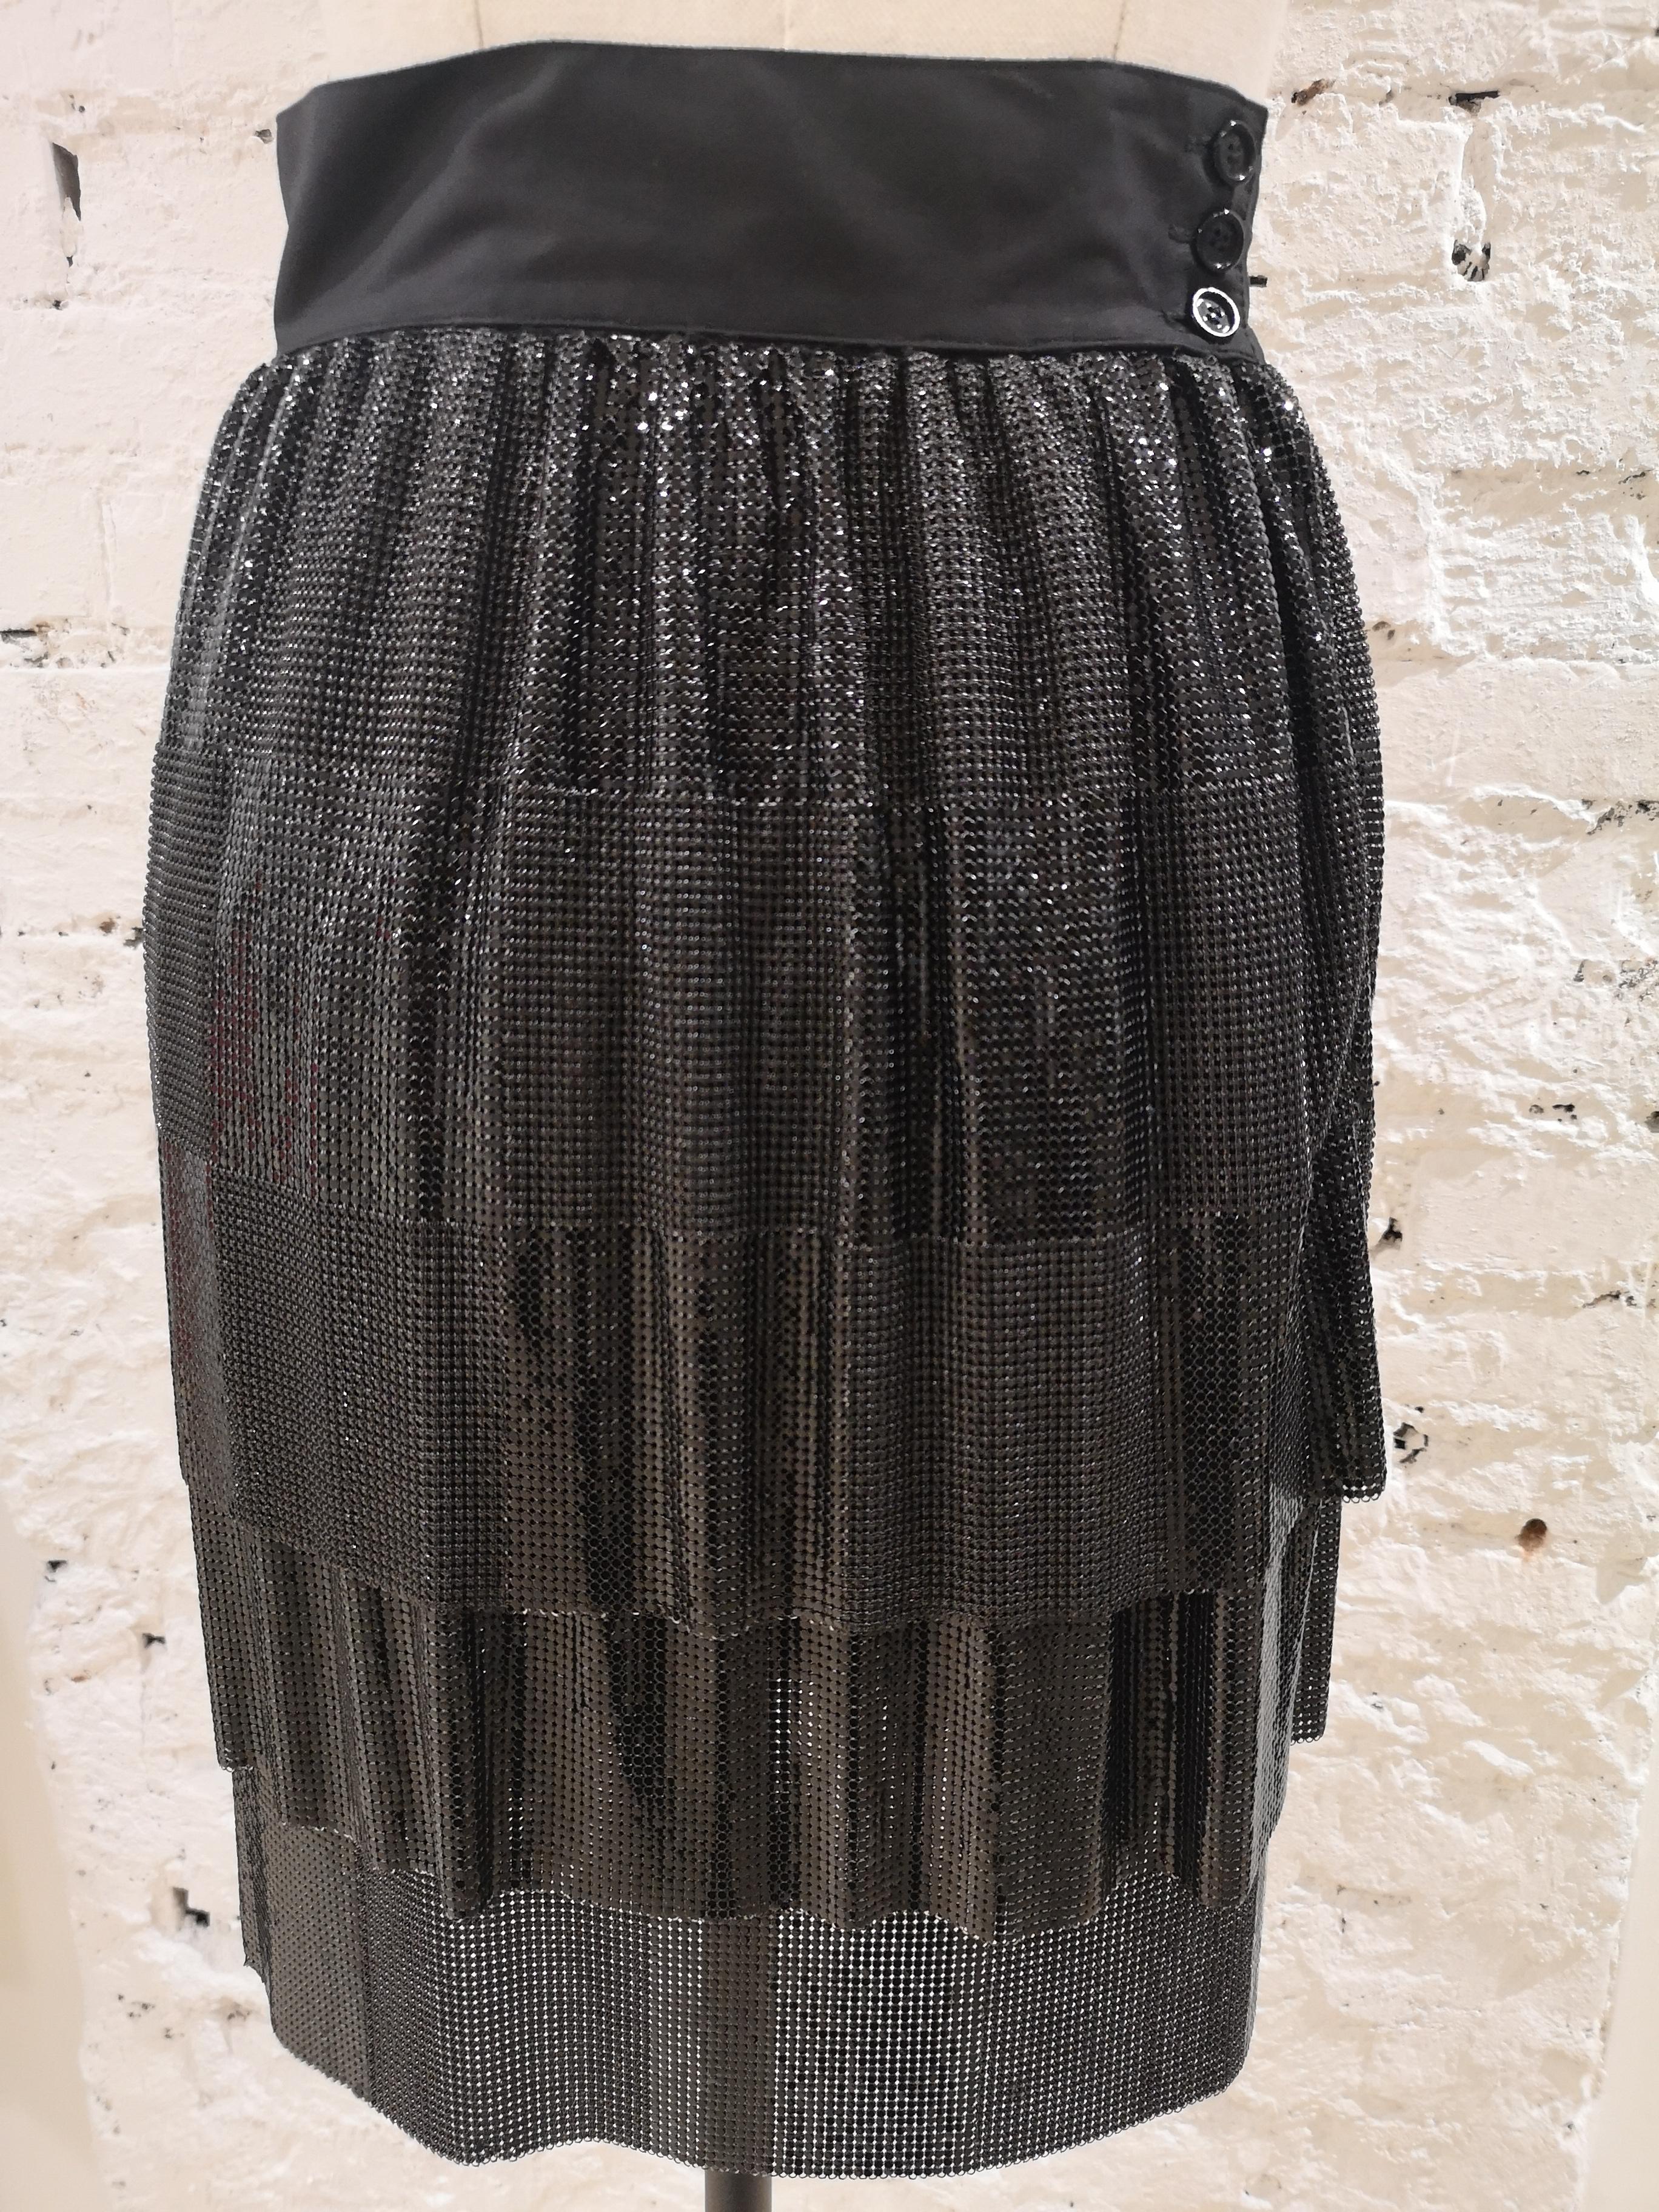 Gianni Versace black Skirt In Excellent Condition For Sale In Capri, IT